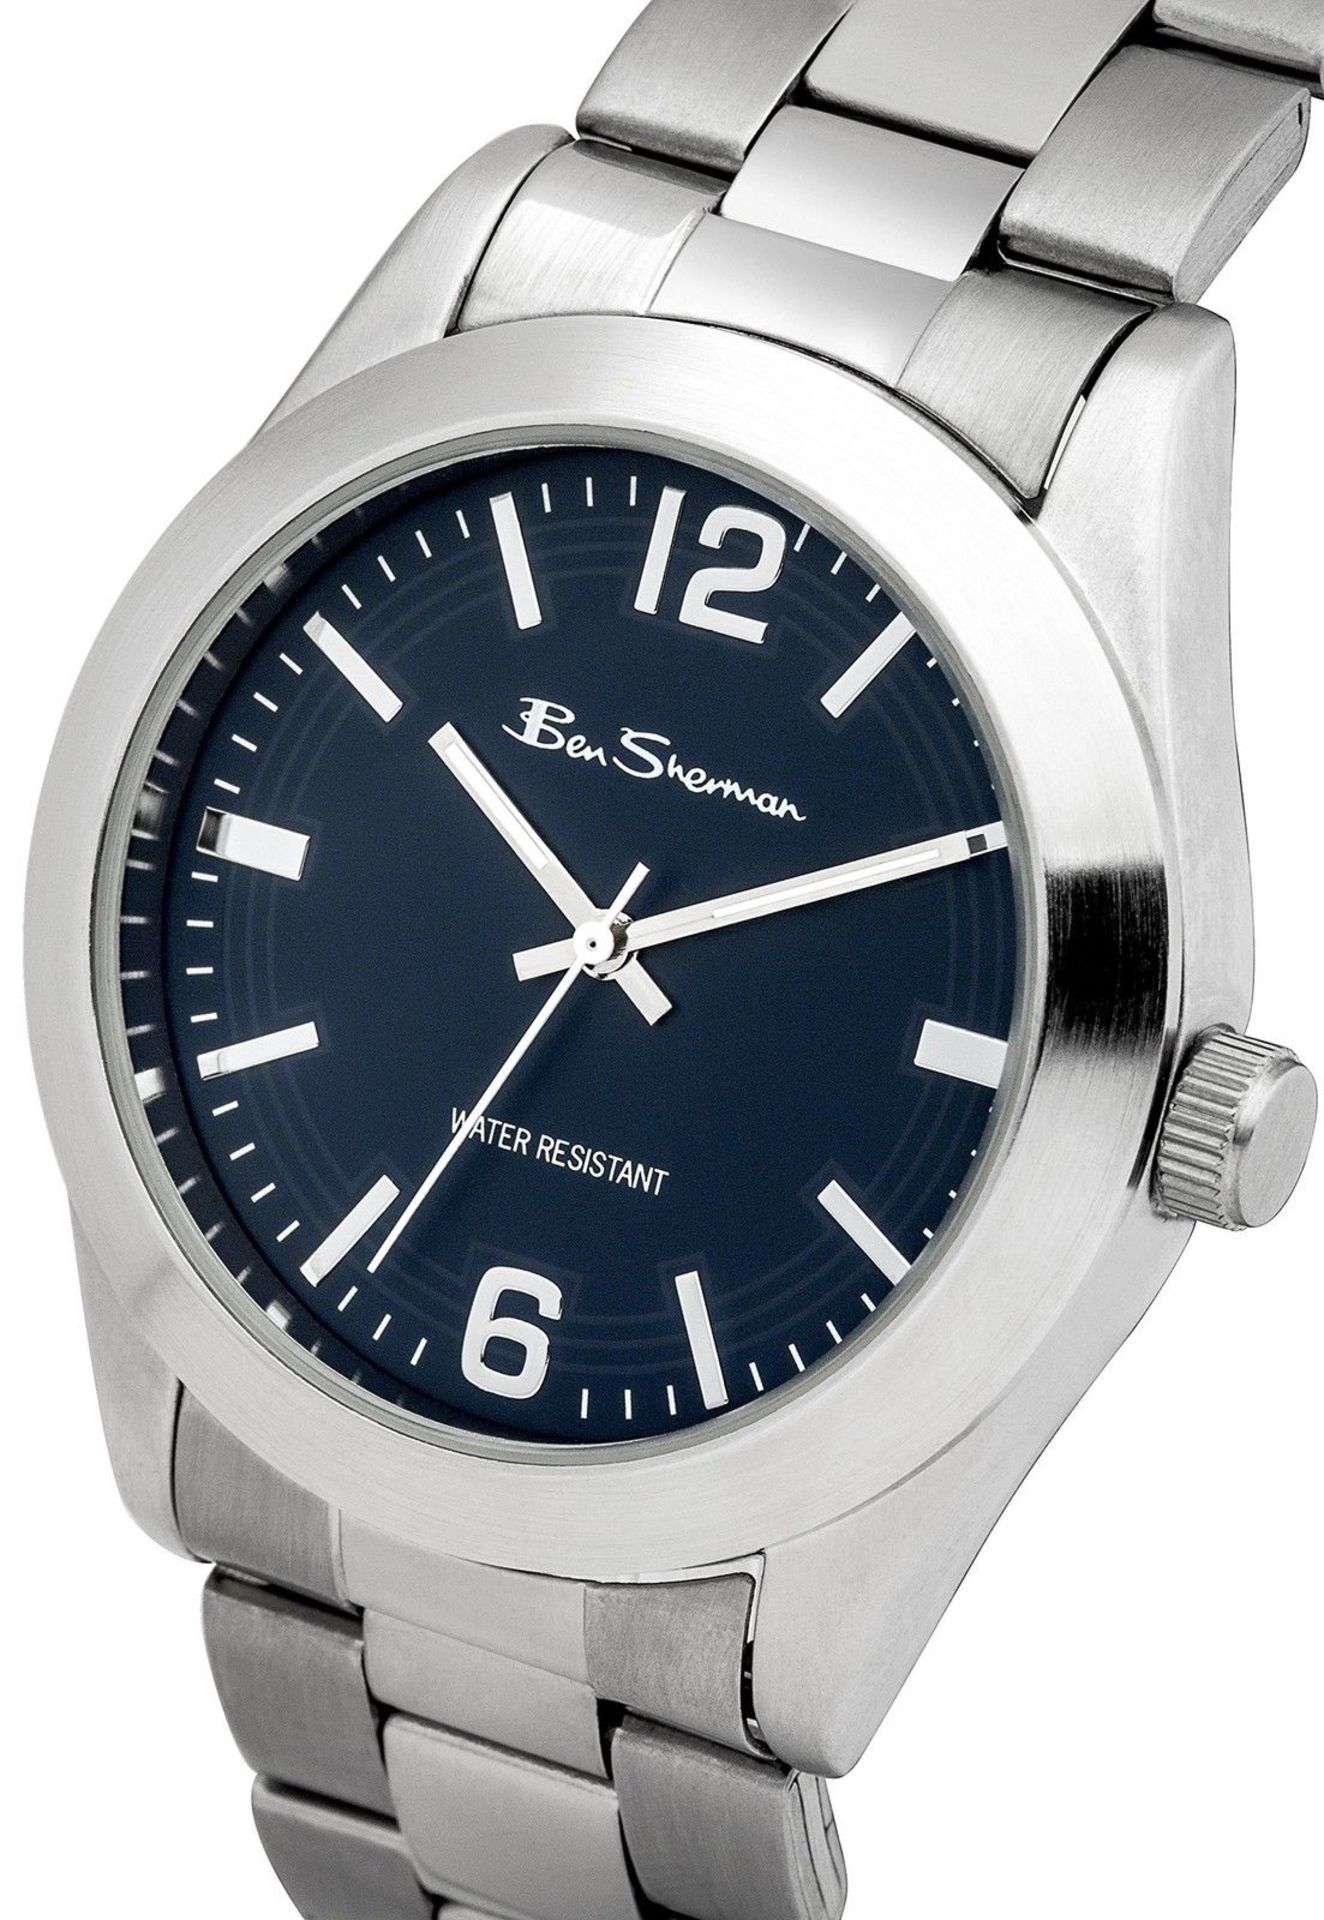 NEW IN BOX BEN SHERMAN MENS WATCH WITH BLUE DIAL *NO VAT* - Image 2 of 4